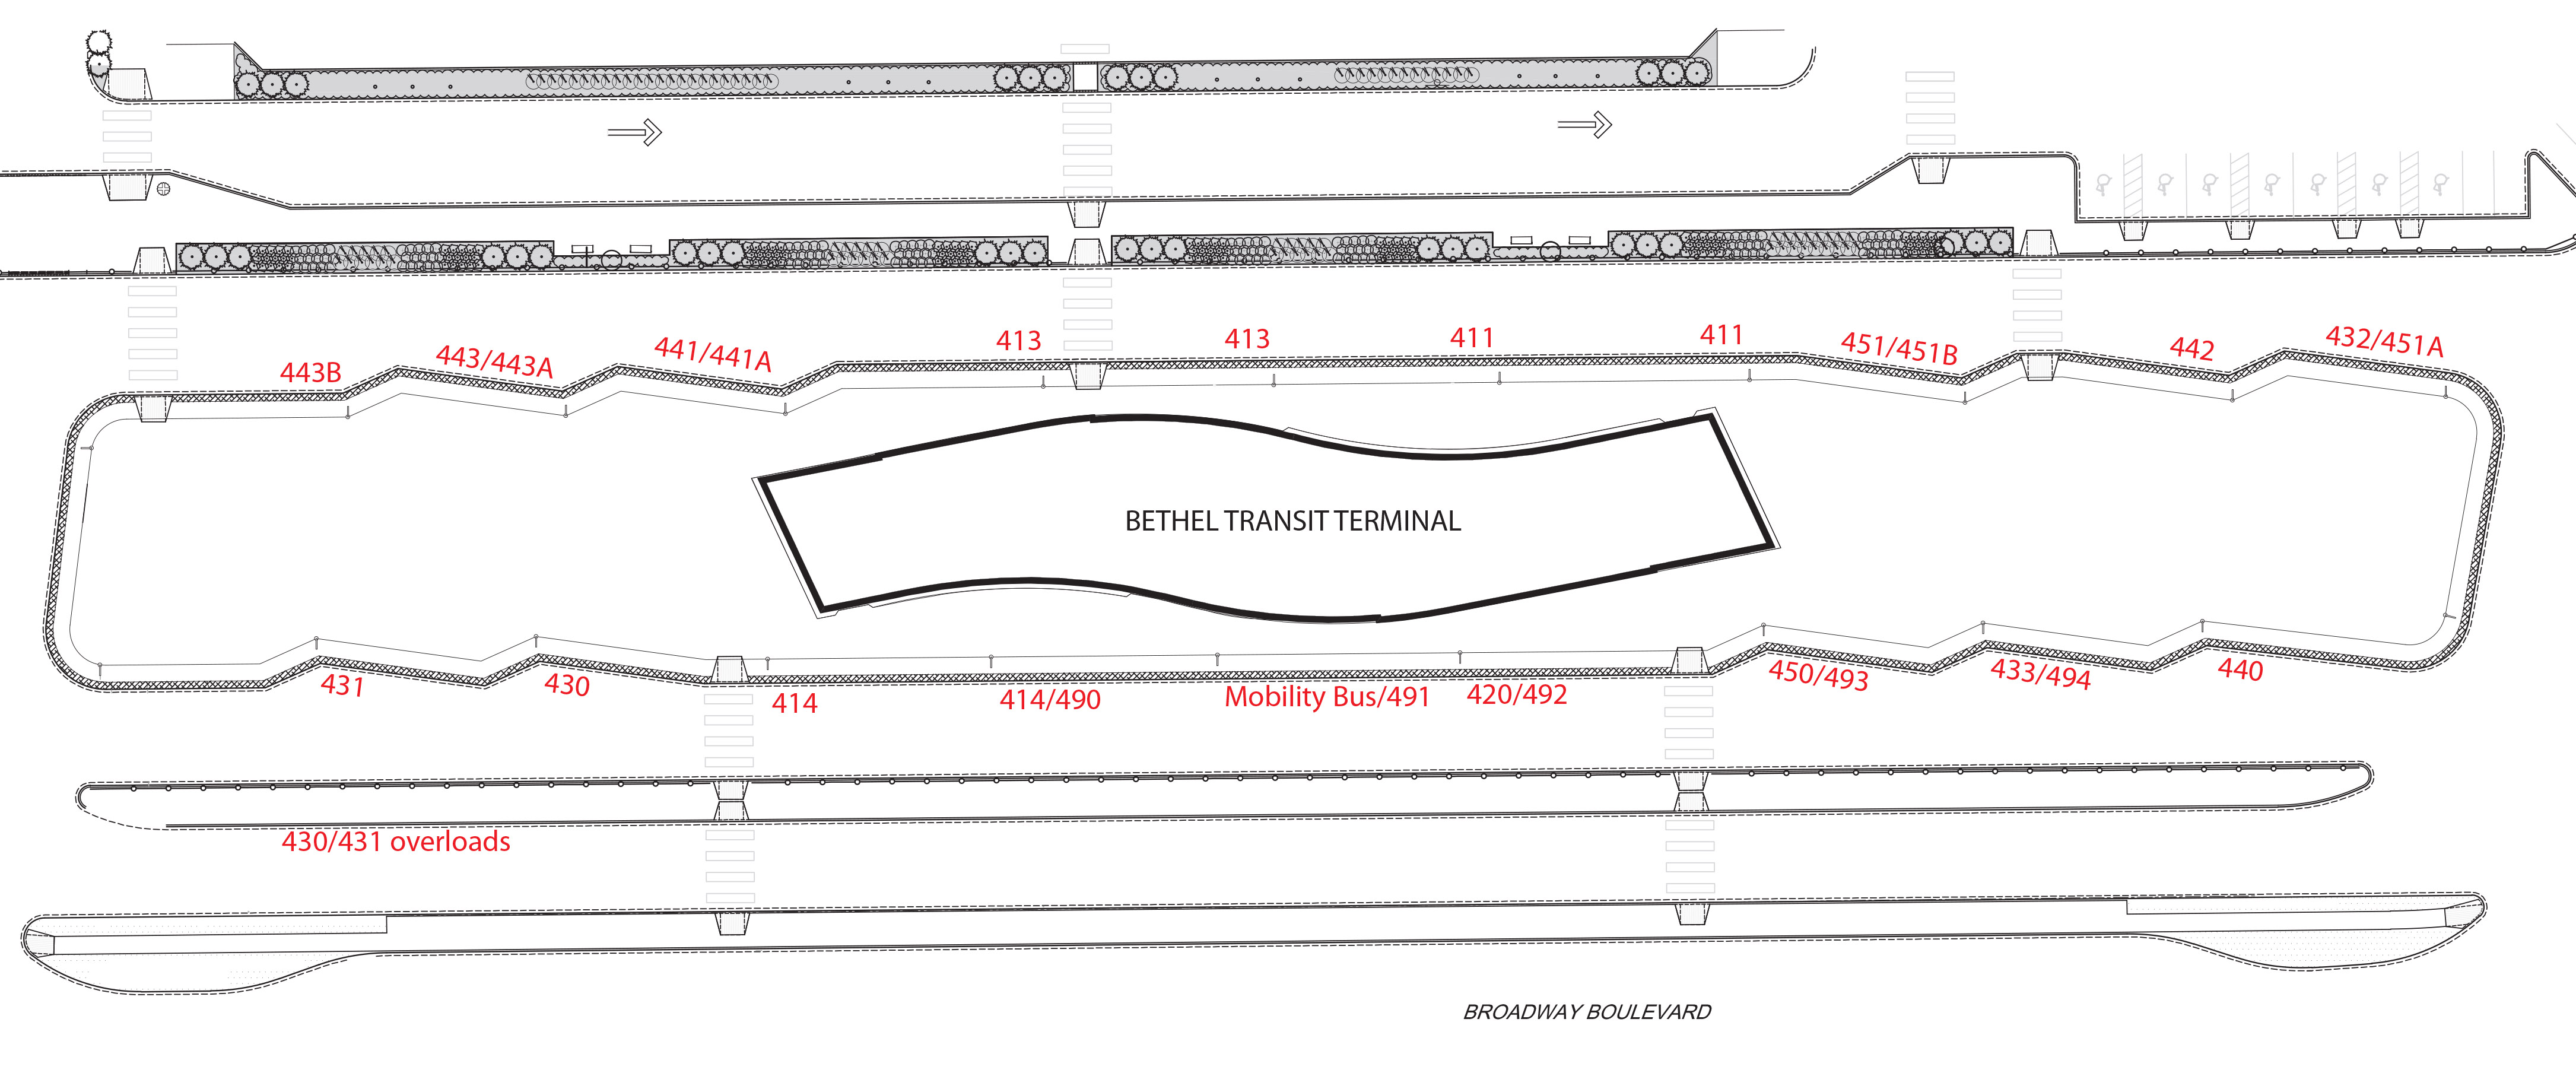 Map of Bethel Transit Terminal bays with corresponding route assignments.